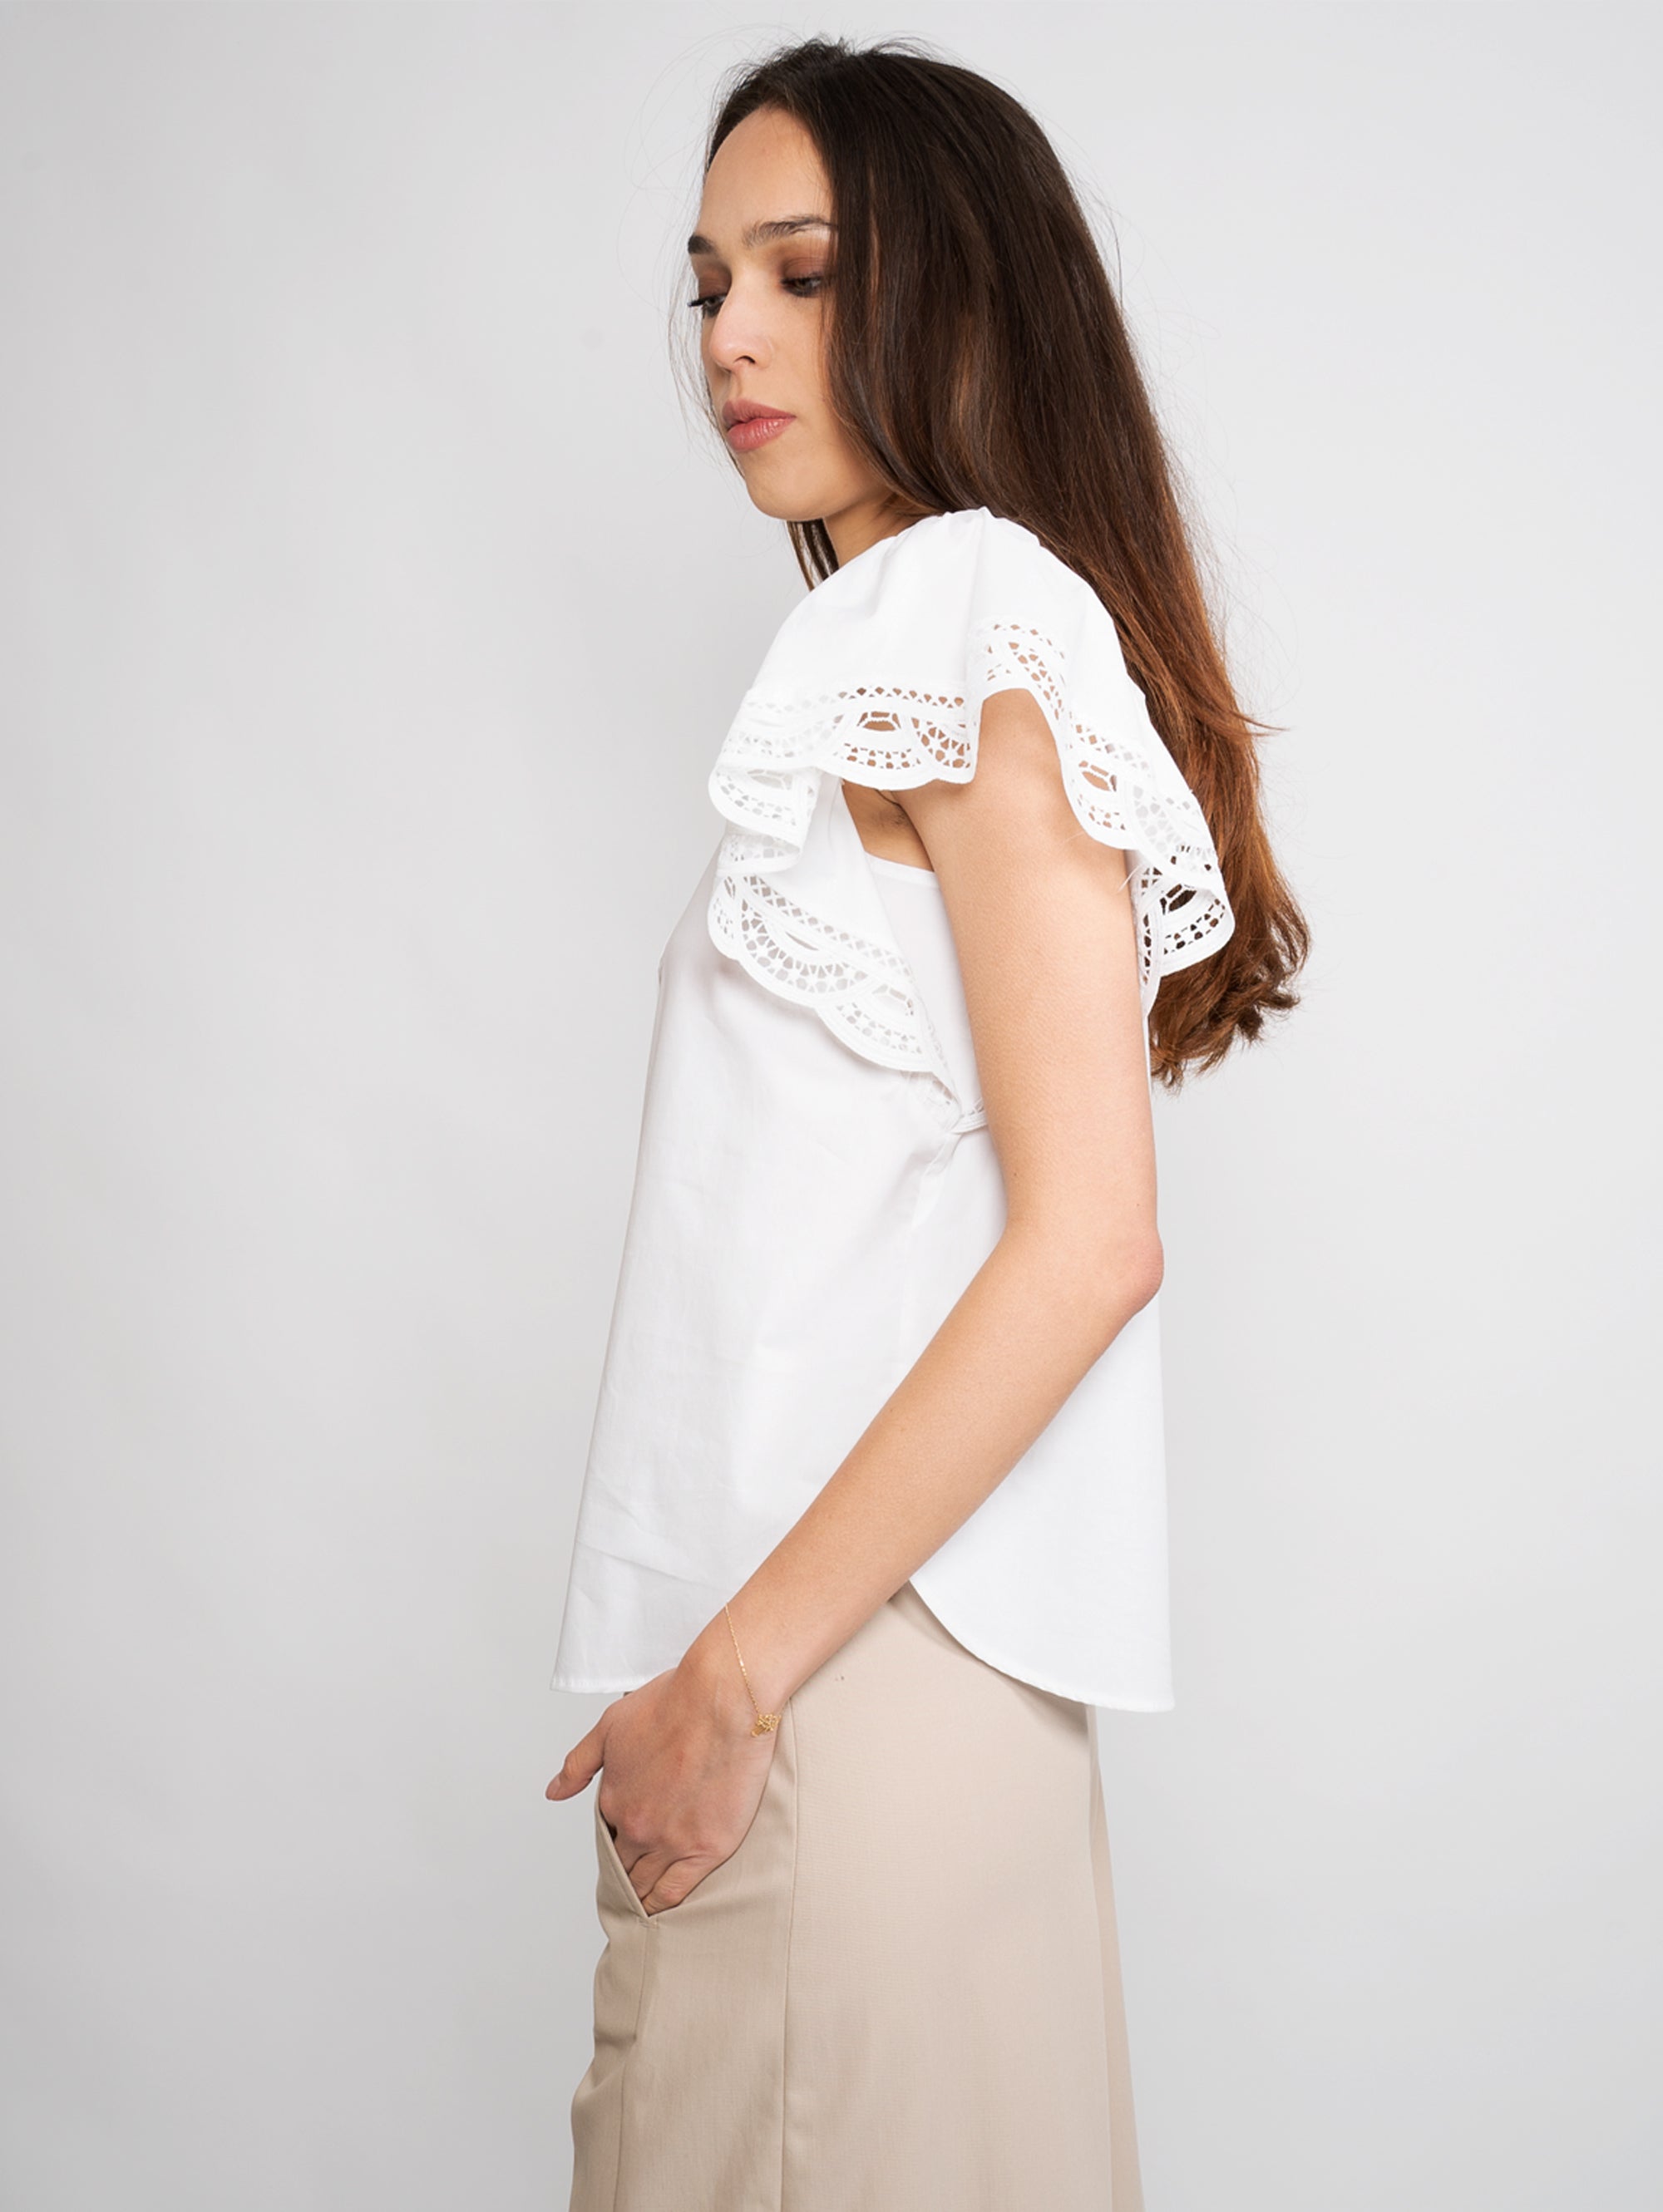 Shirt with White Applied Lace